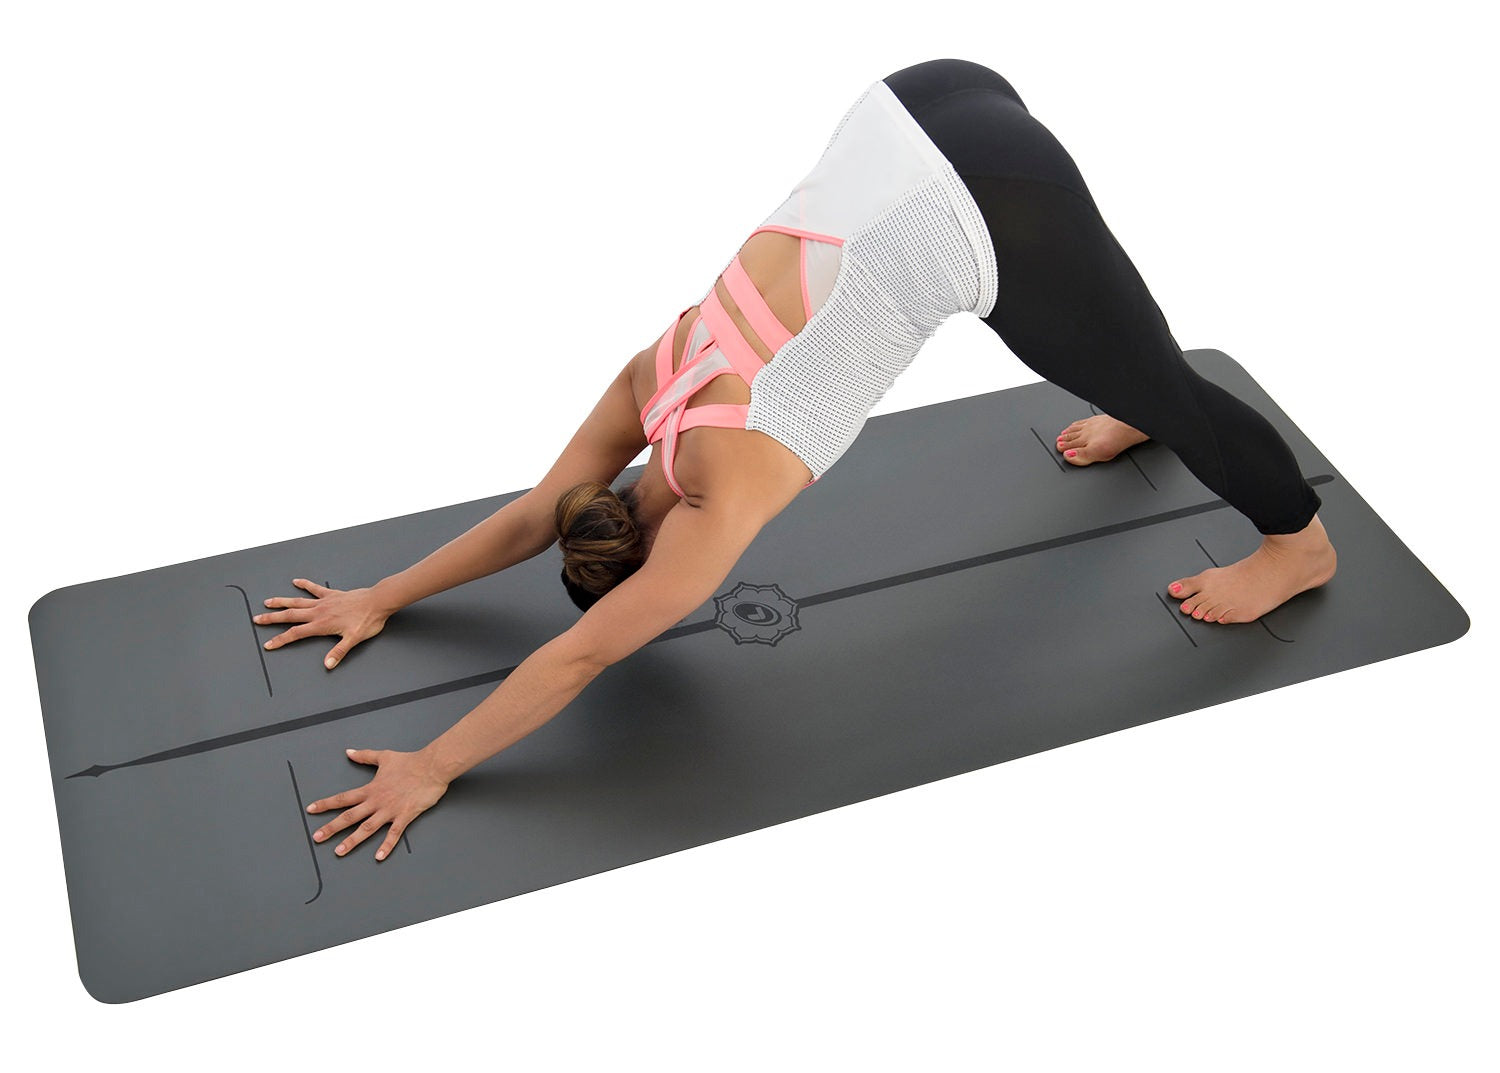 Liforme Evolve Yoga Mat - Green  Featuring A Refined Alignment System